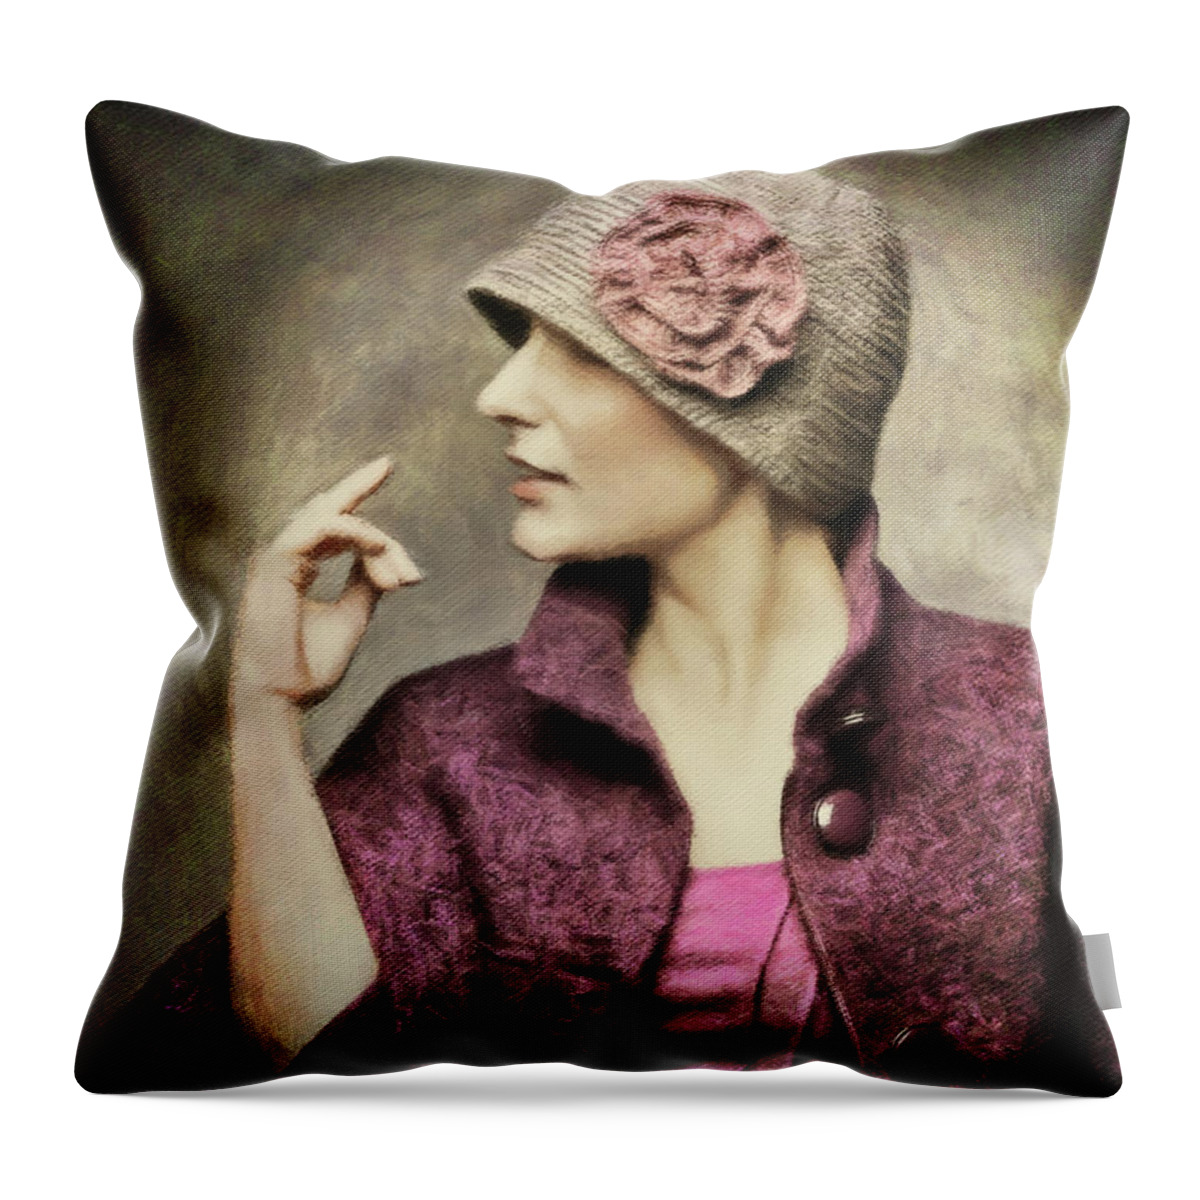 Woman In Cloche Hat Throw Pillow featuring the painting The Attitude of Fashion by Susan Maxwell Schmidt